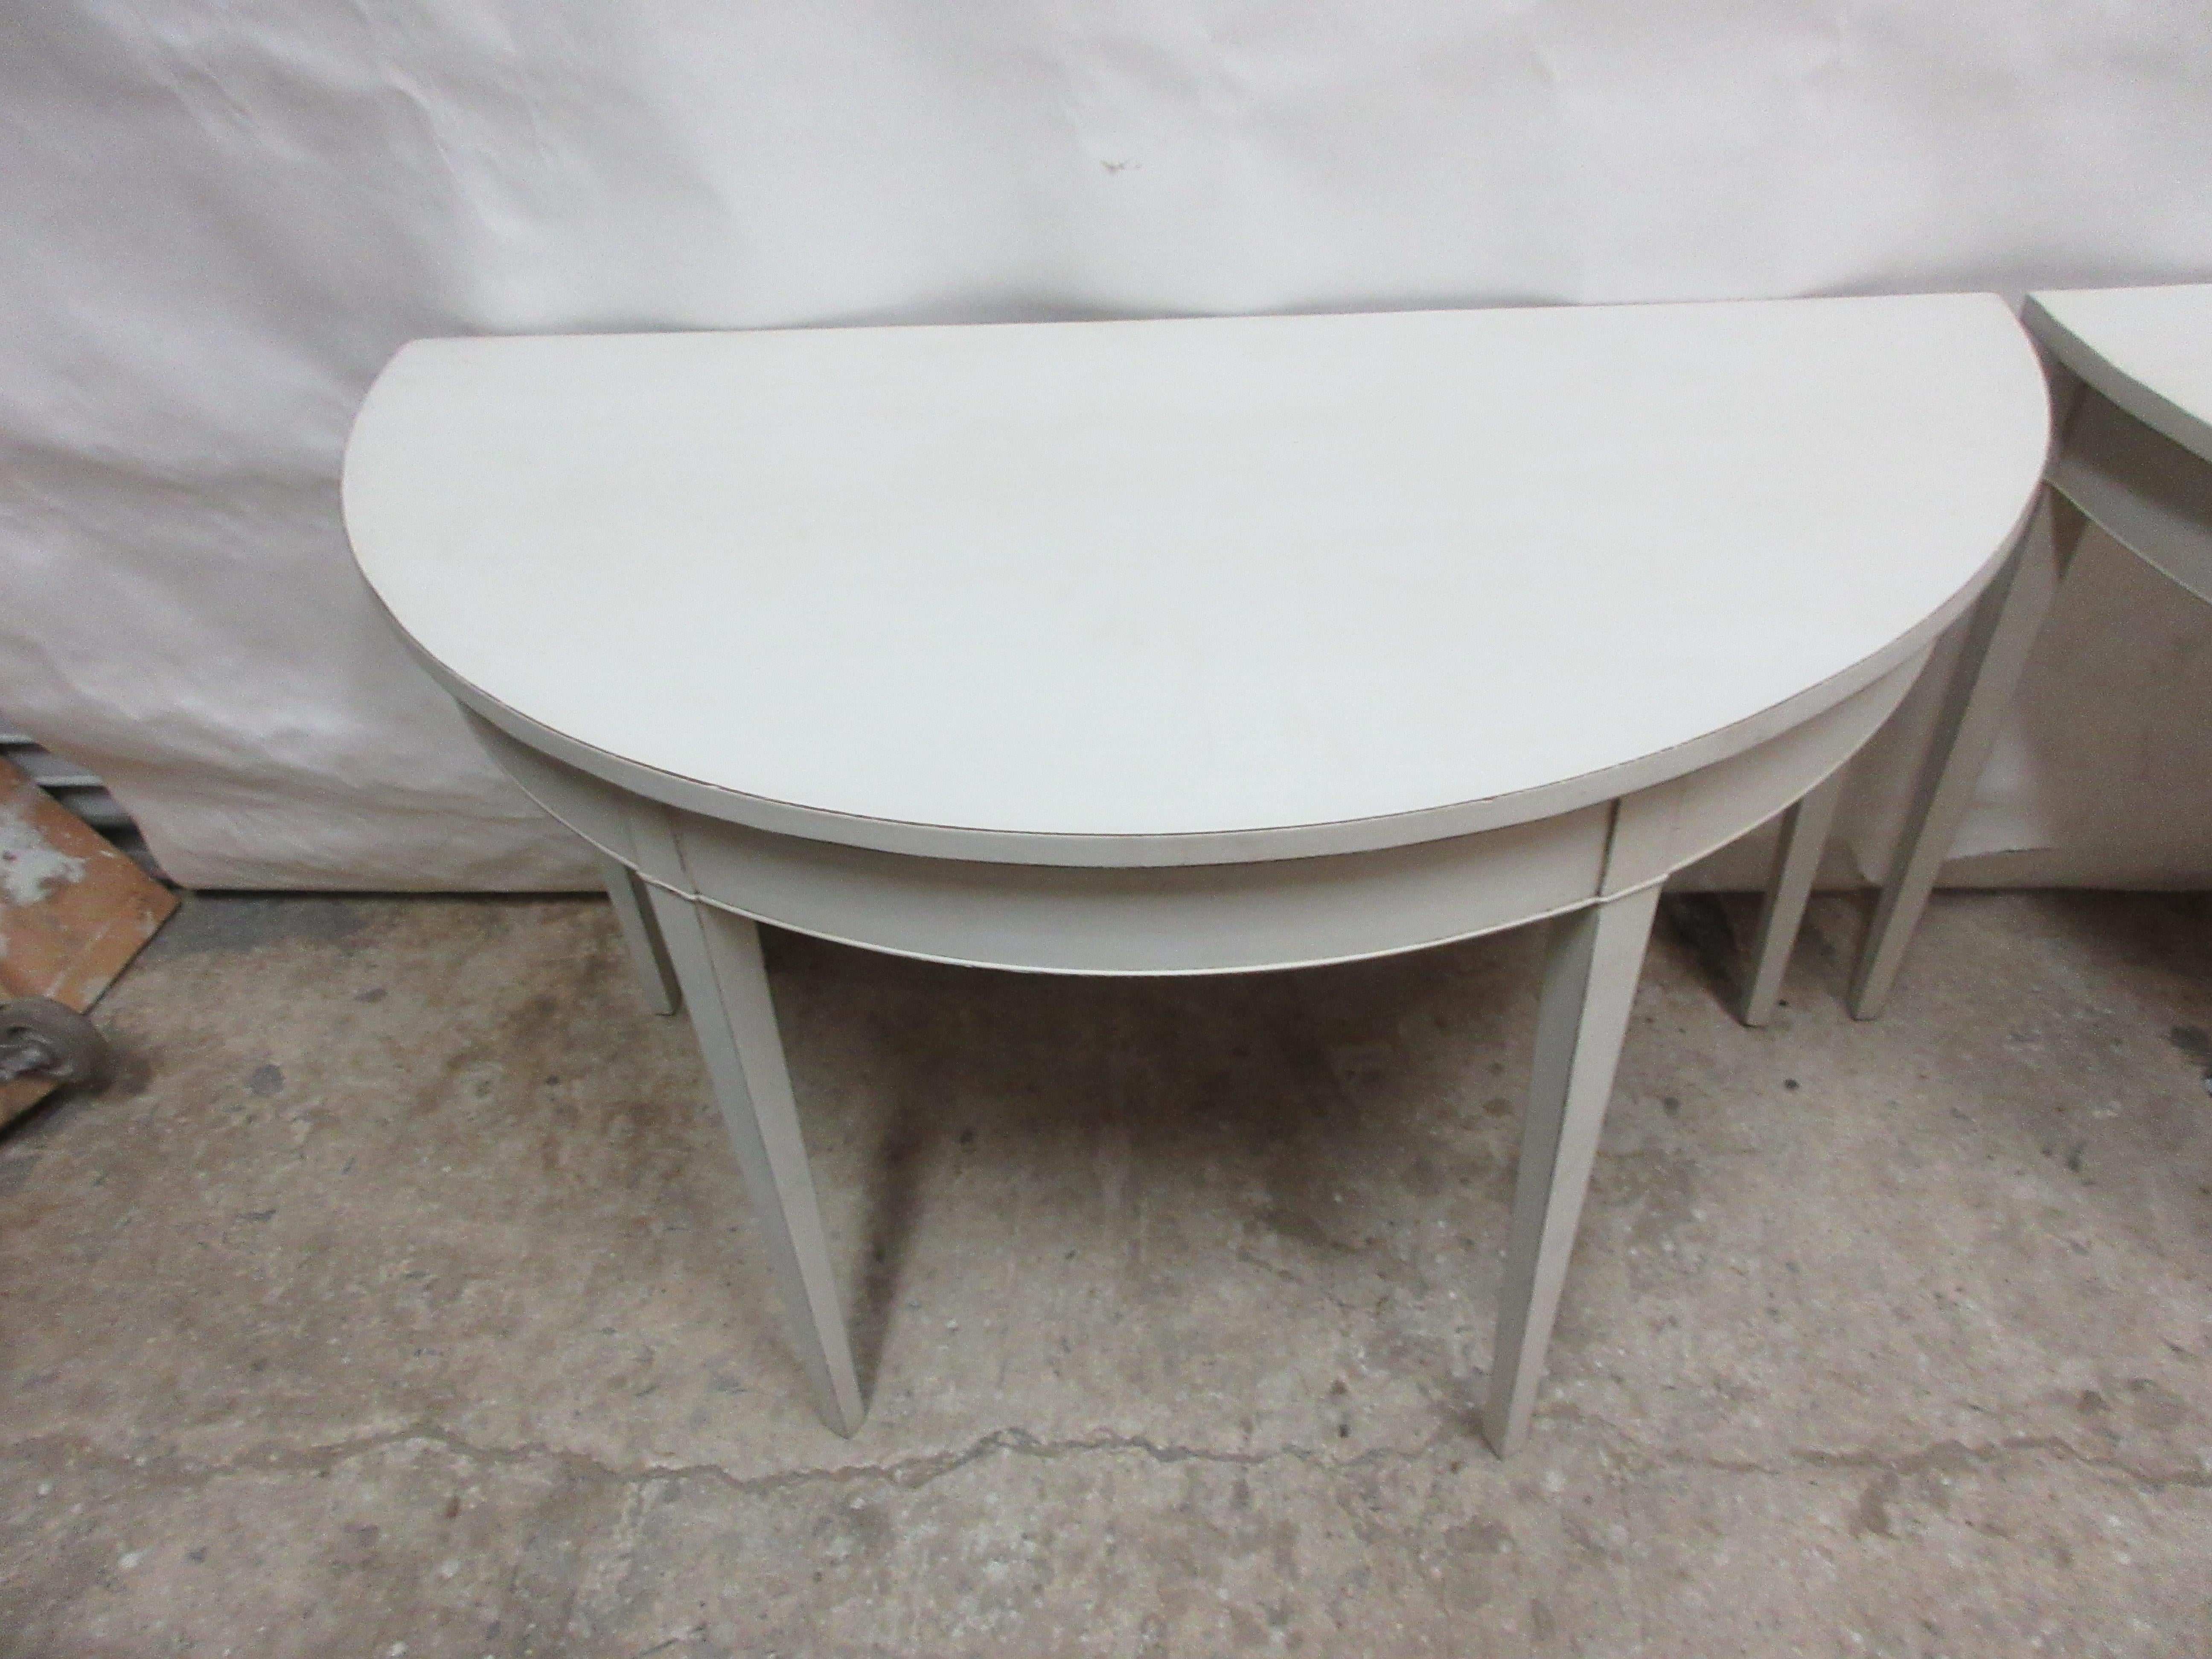 Gustavian Style 4 Legged Demi-Lune Tables In Good Condition For Sale In Hollywood, FL